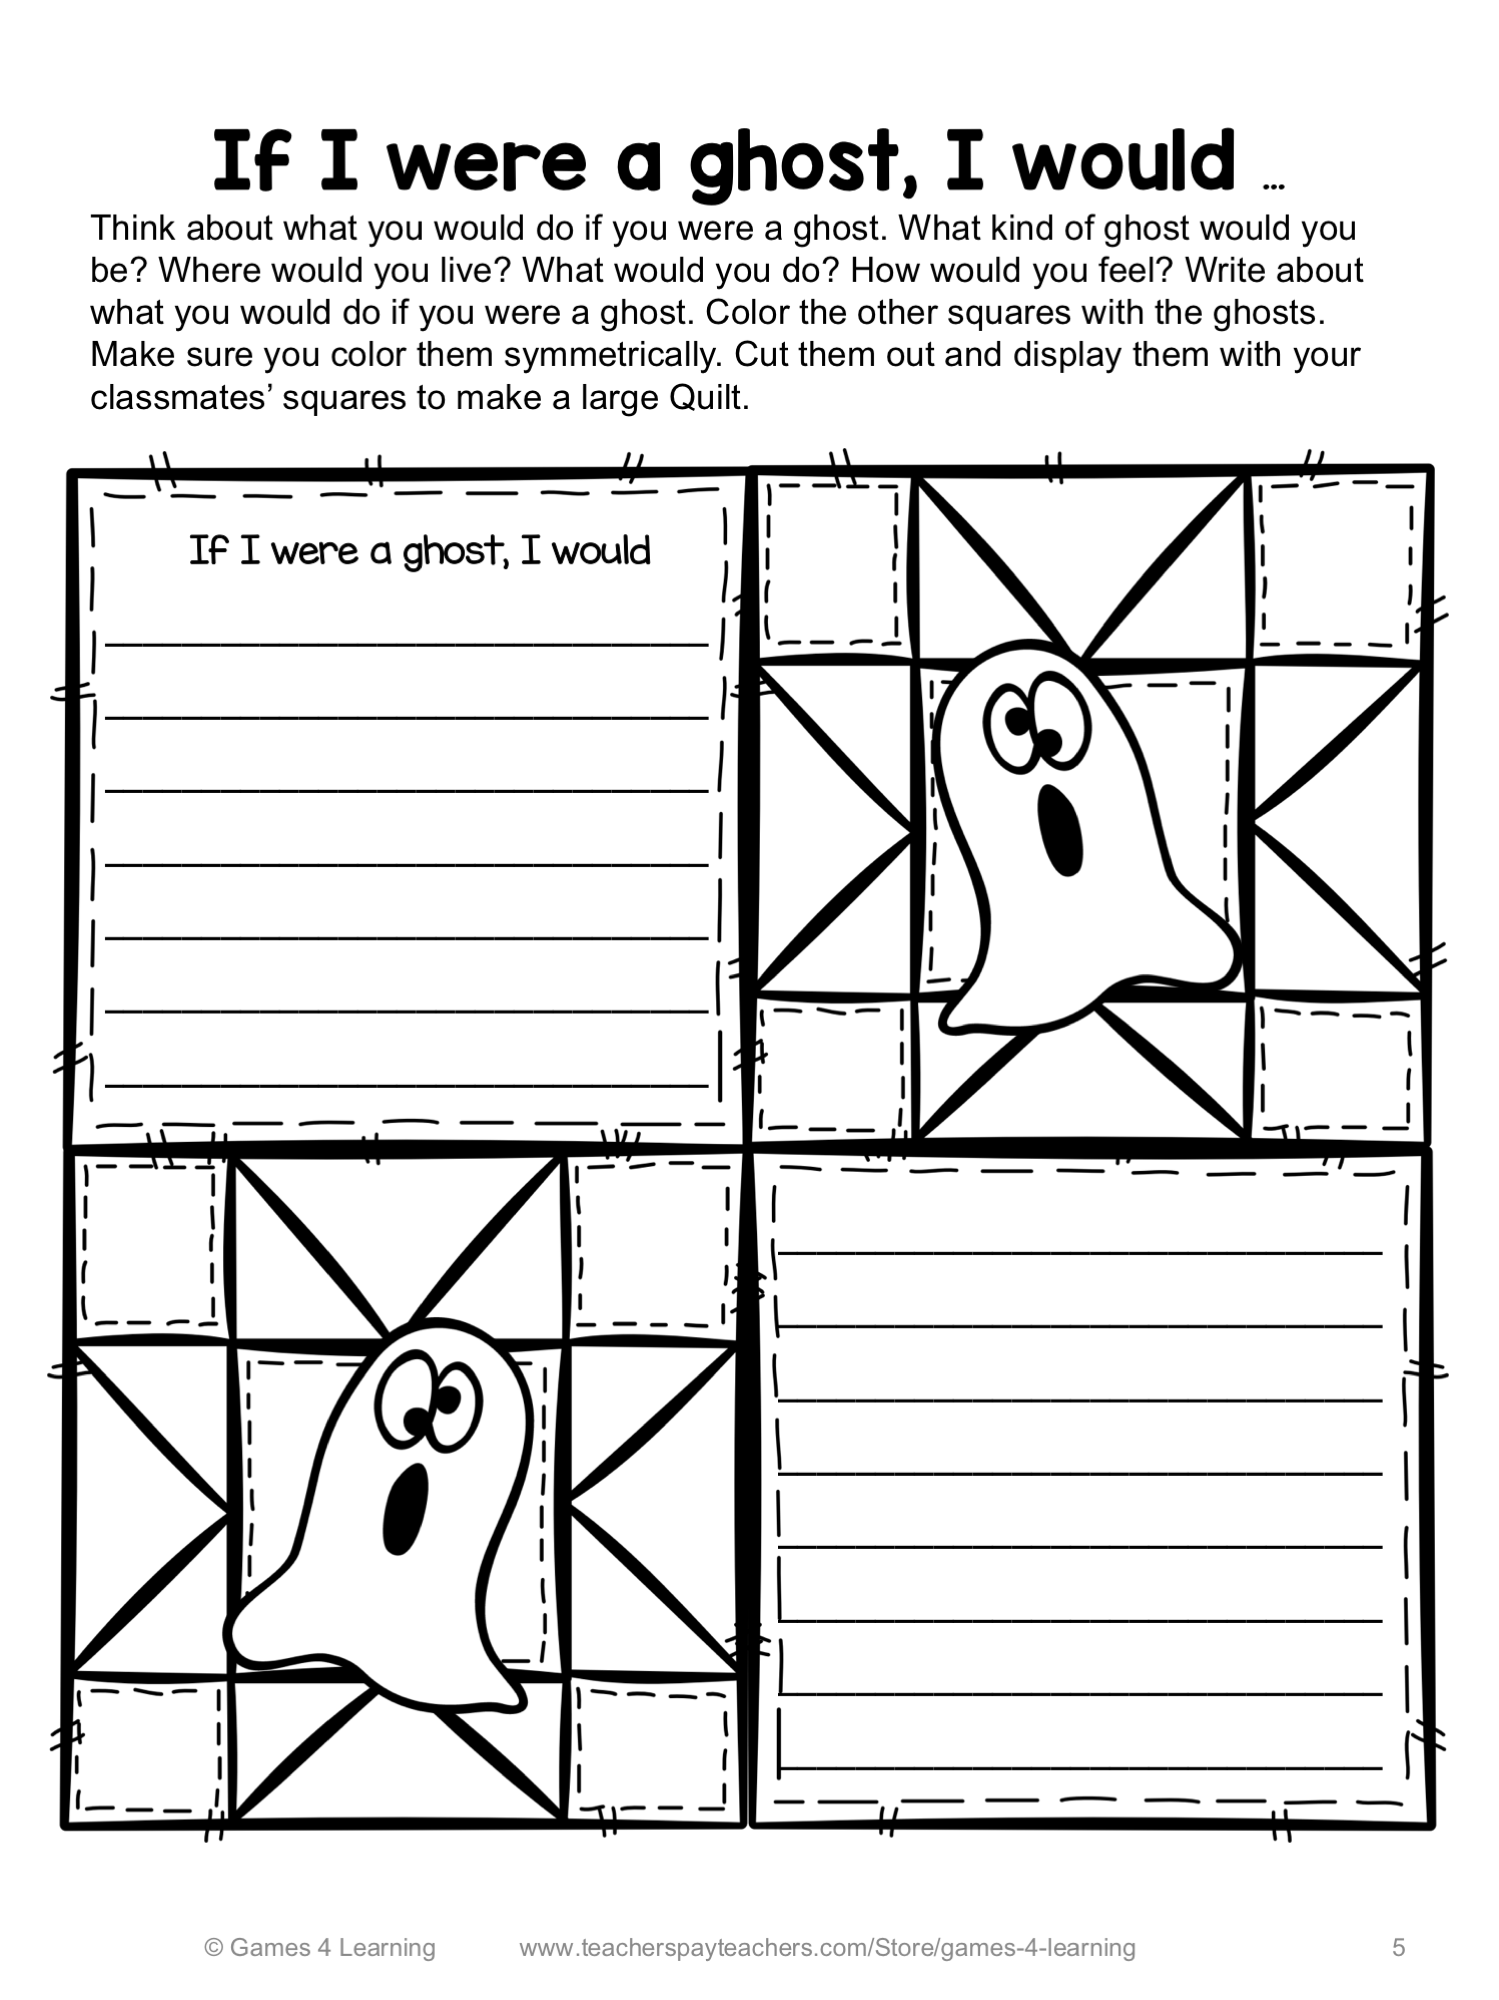 halloween-writing-prompts-quilt